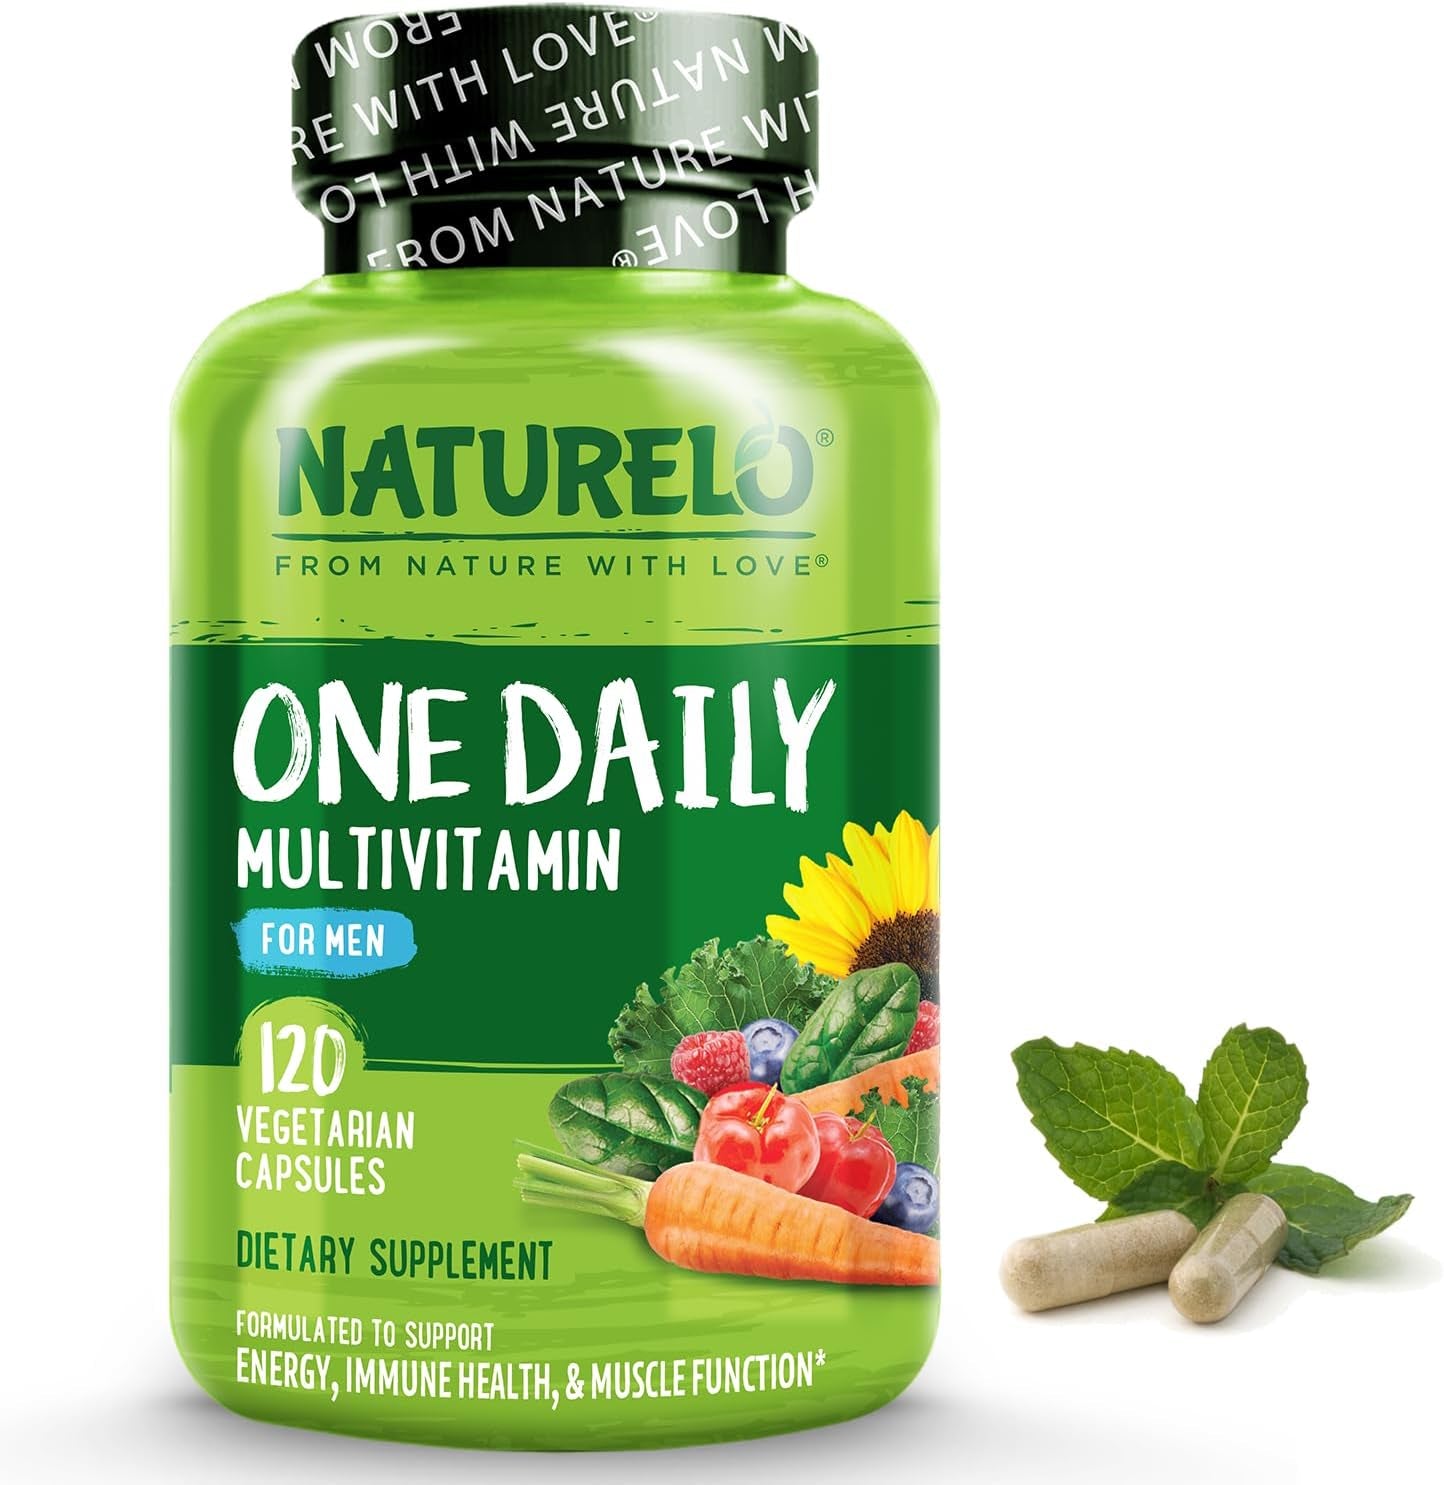 One Daily Multivitamin for Men - with Vitamins & Minerals + Organic Whole Foods - Supplement to Boost Energy, General Health - Non-Gmo - 120 Capsules - 4 Month Supply